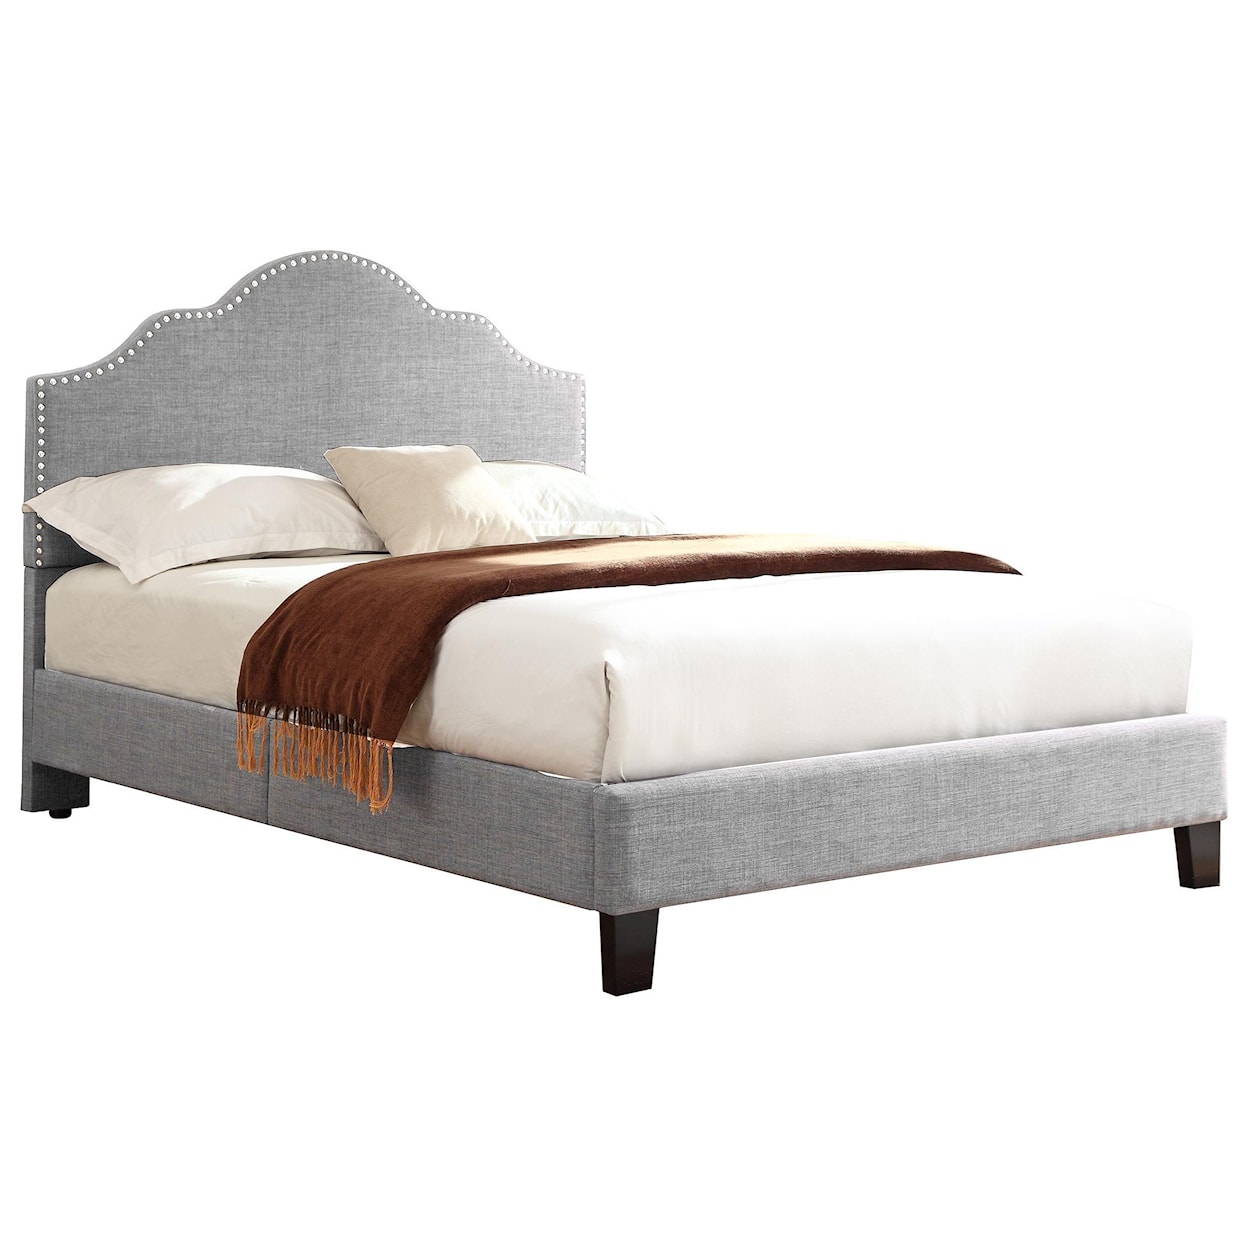 Emerald Madison Queen Upholstered Bed